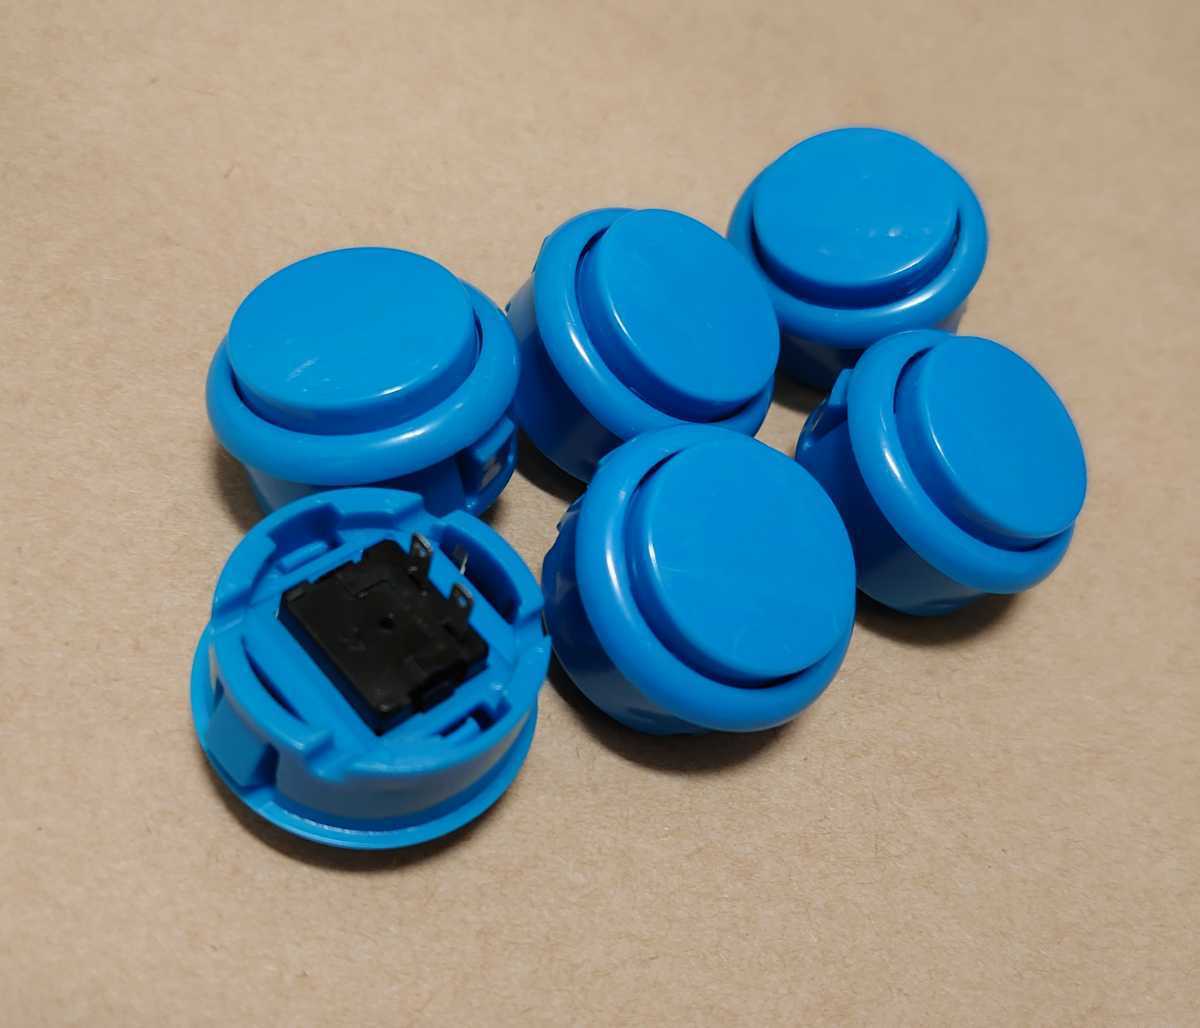 6 piece blue pushed . button blue 30mm 30Φ controller ake navy blue. original work . push button arcade game case navy blue panel for Sanwa electron interchangeable blue color 